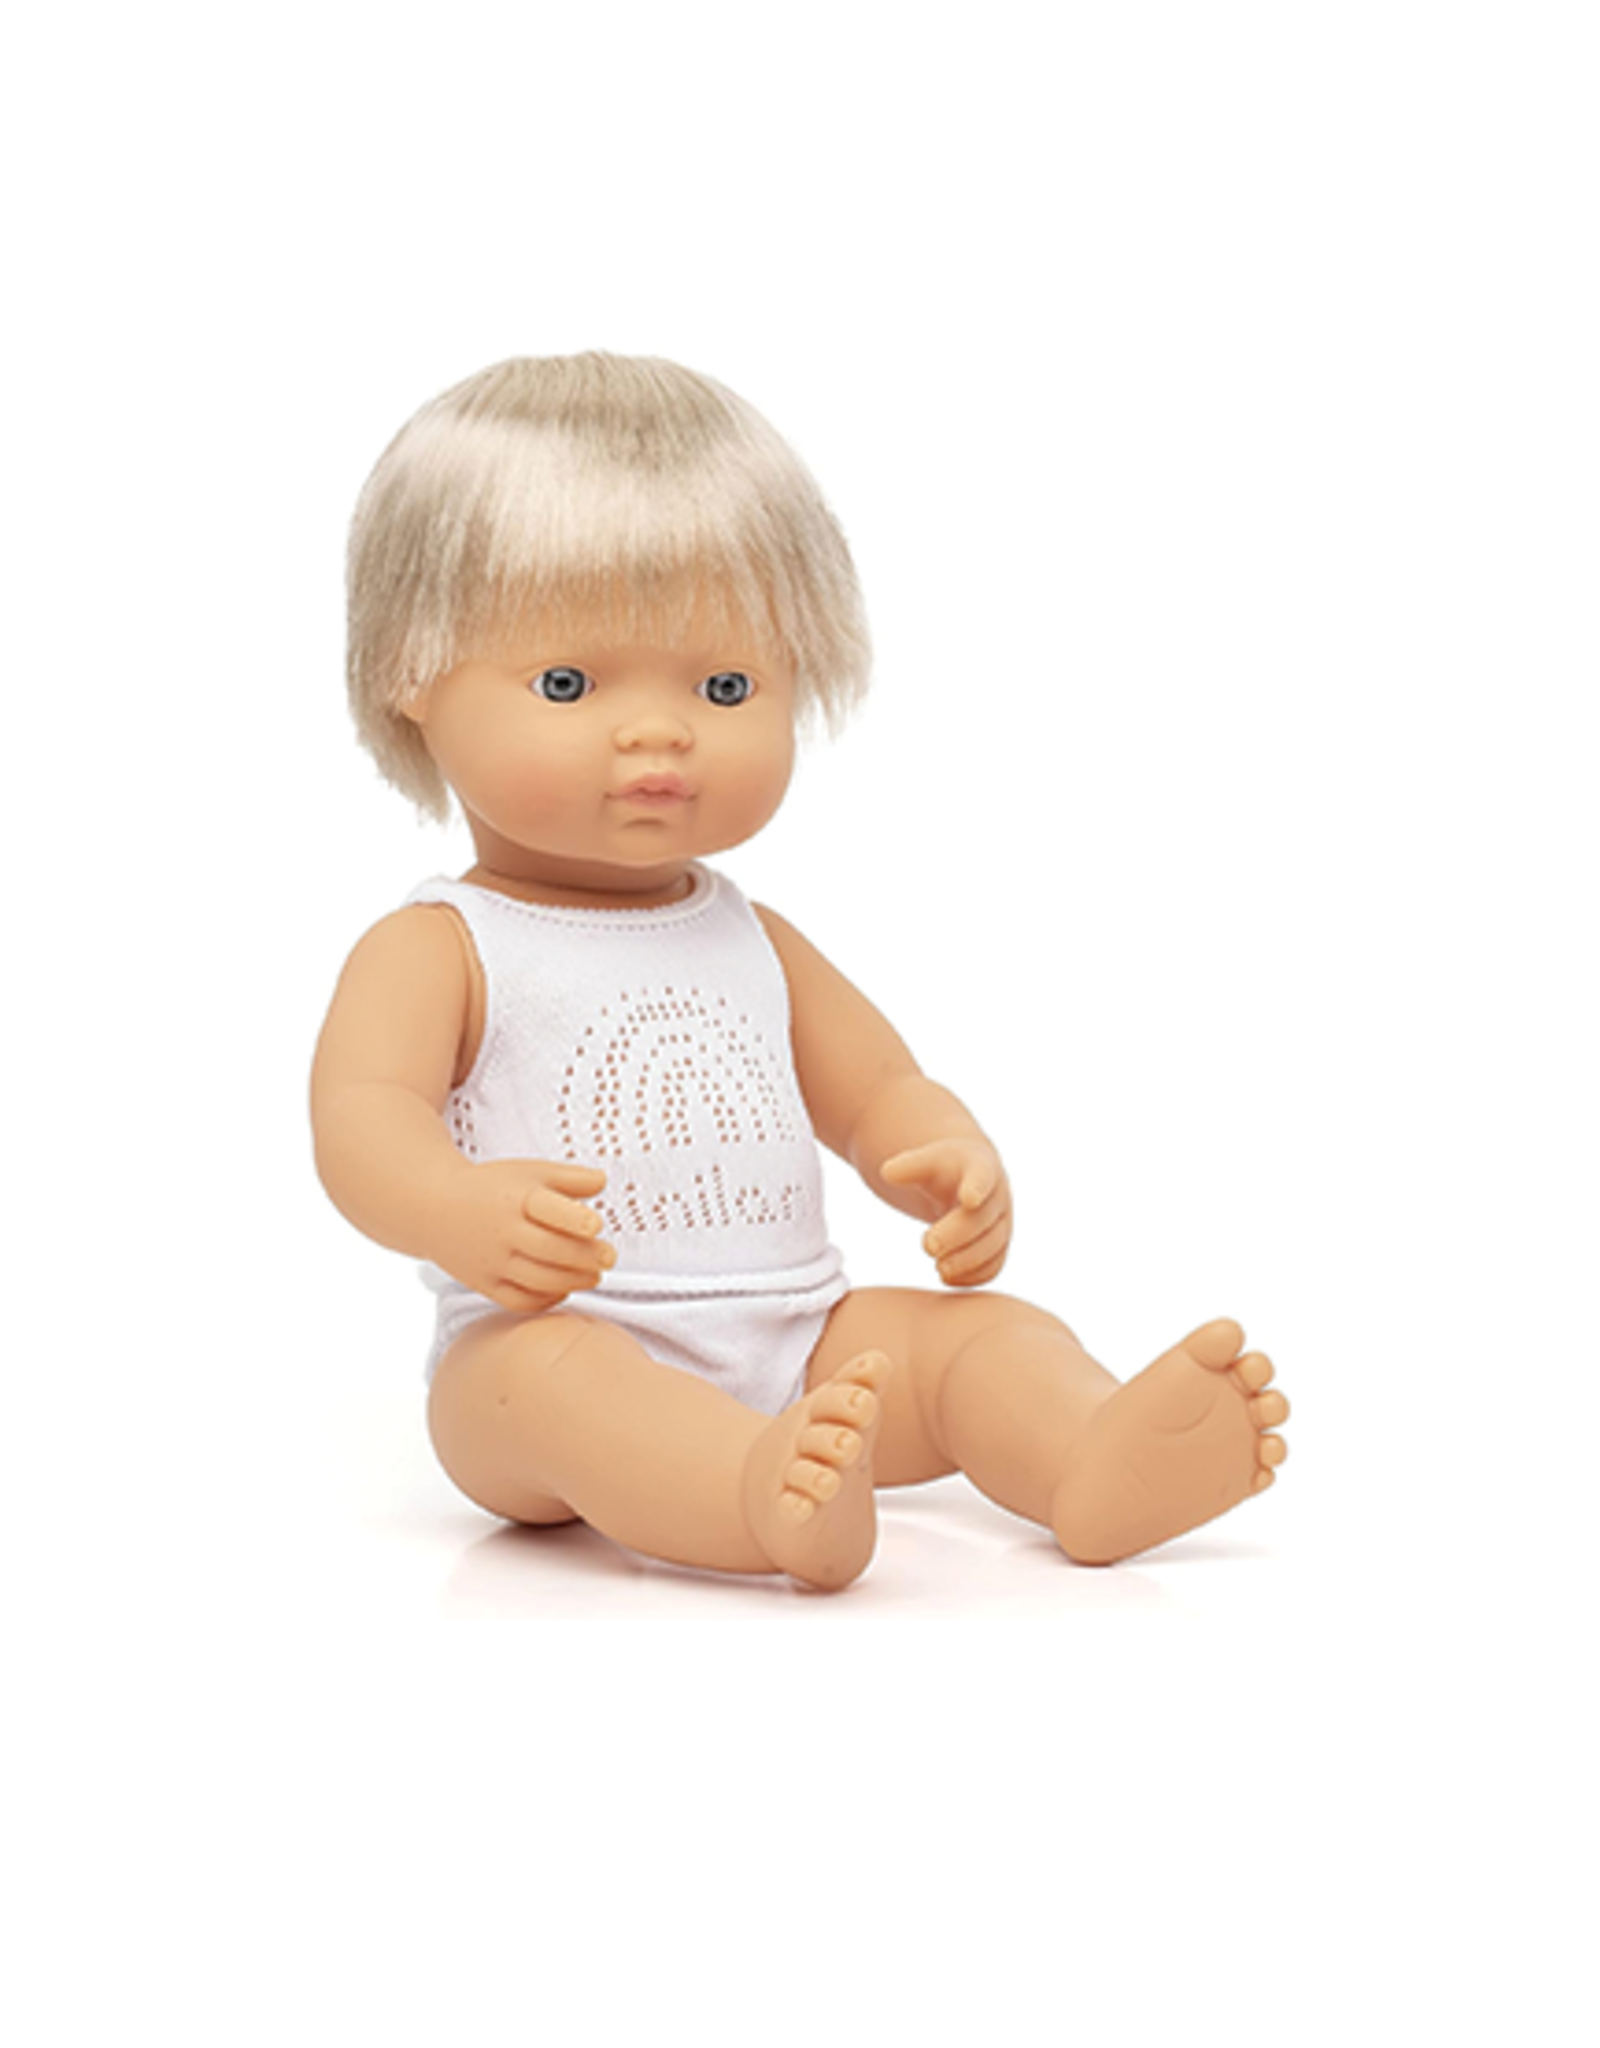 Baby Doll, European Boy 15 (Blonde Hair) - The Bee's Knees Toys and Books